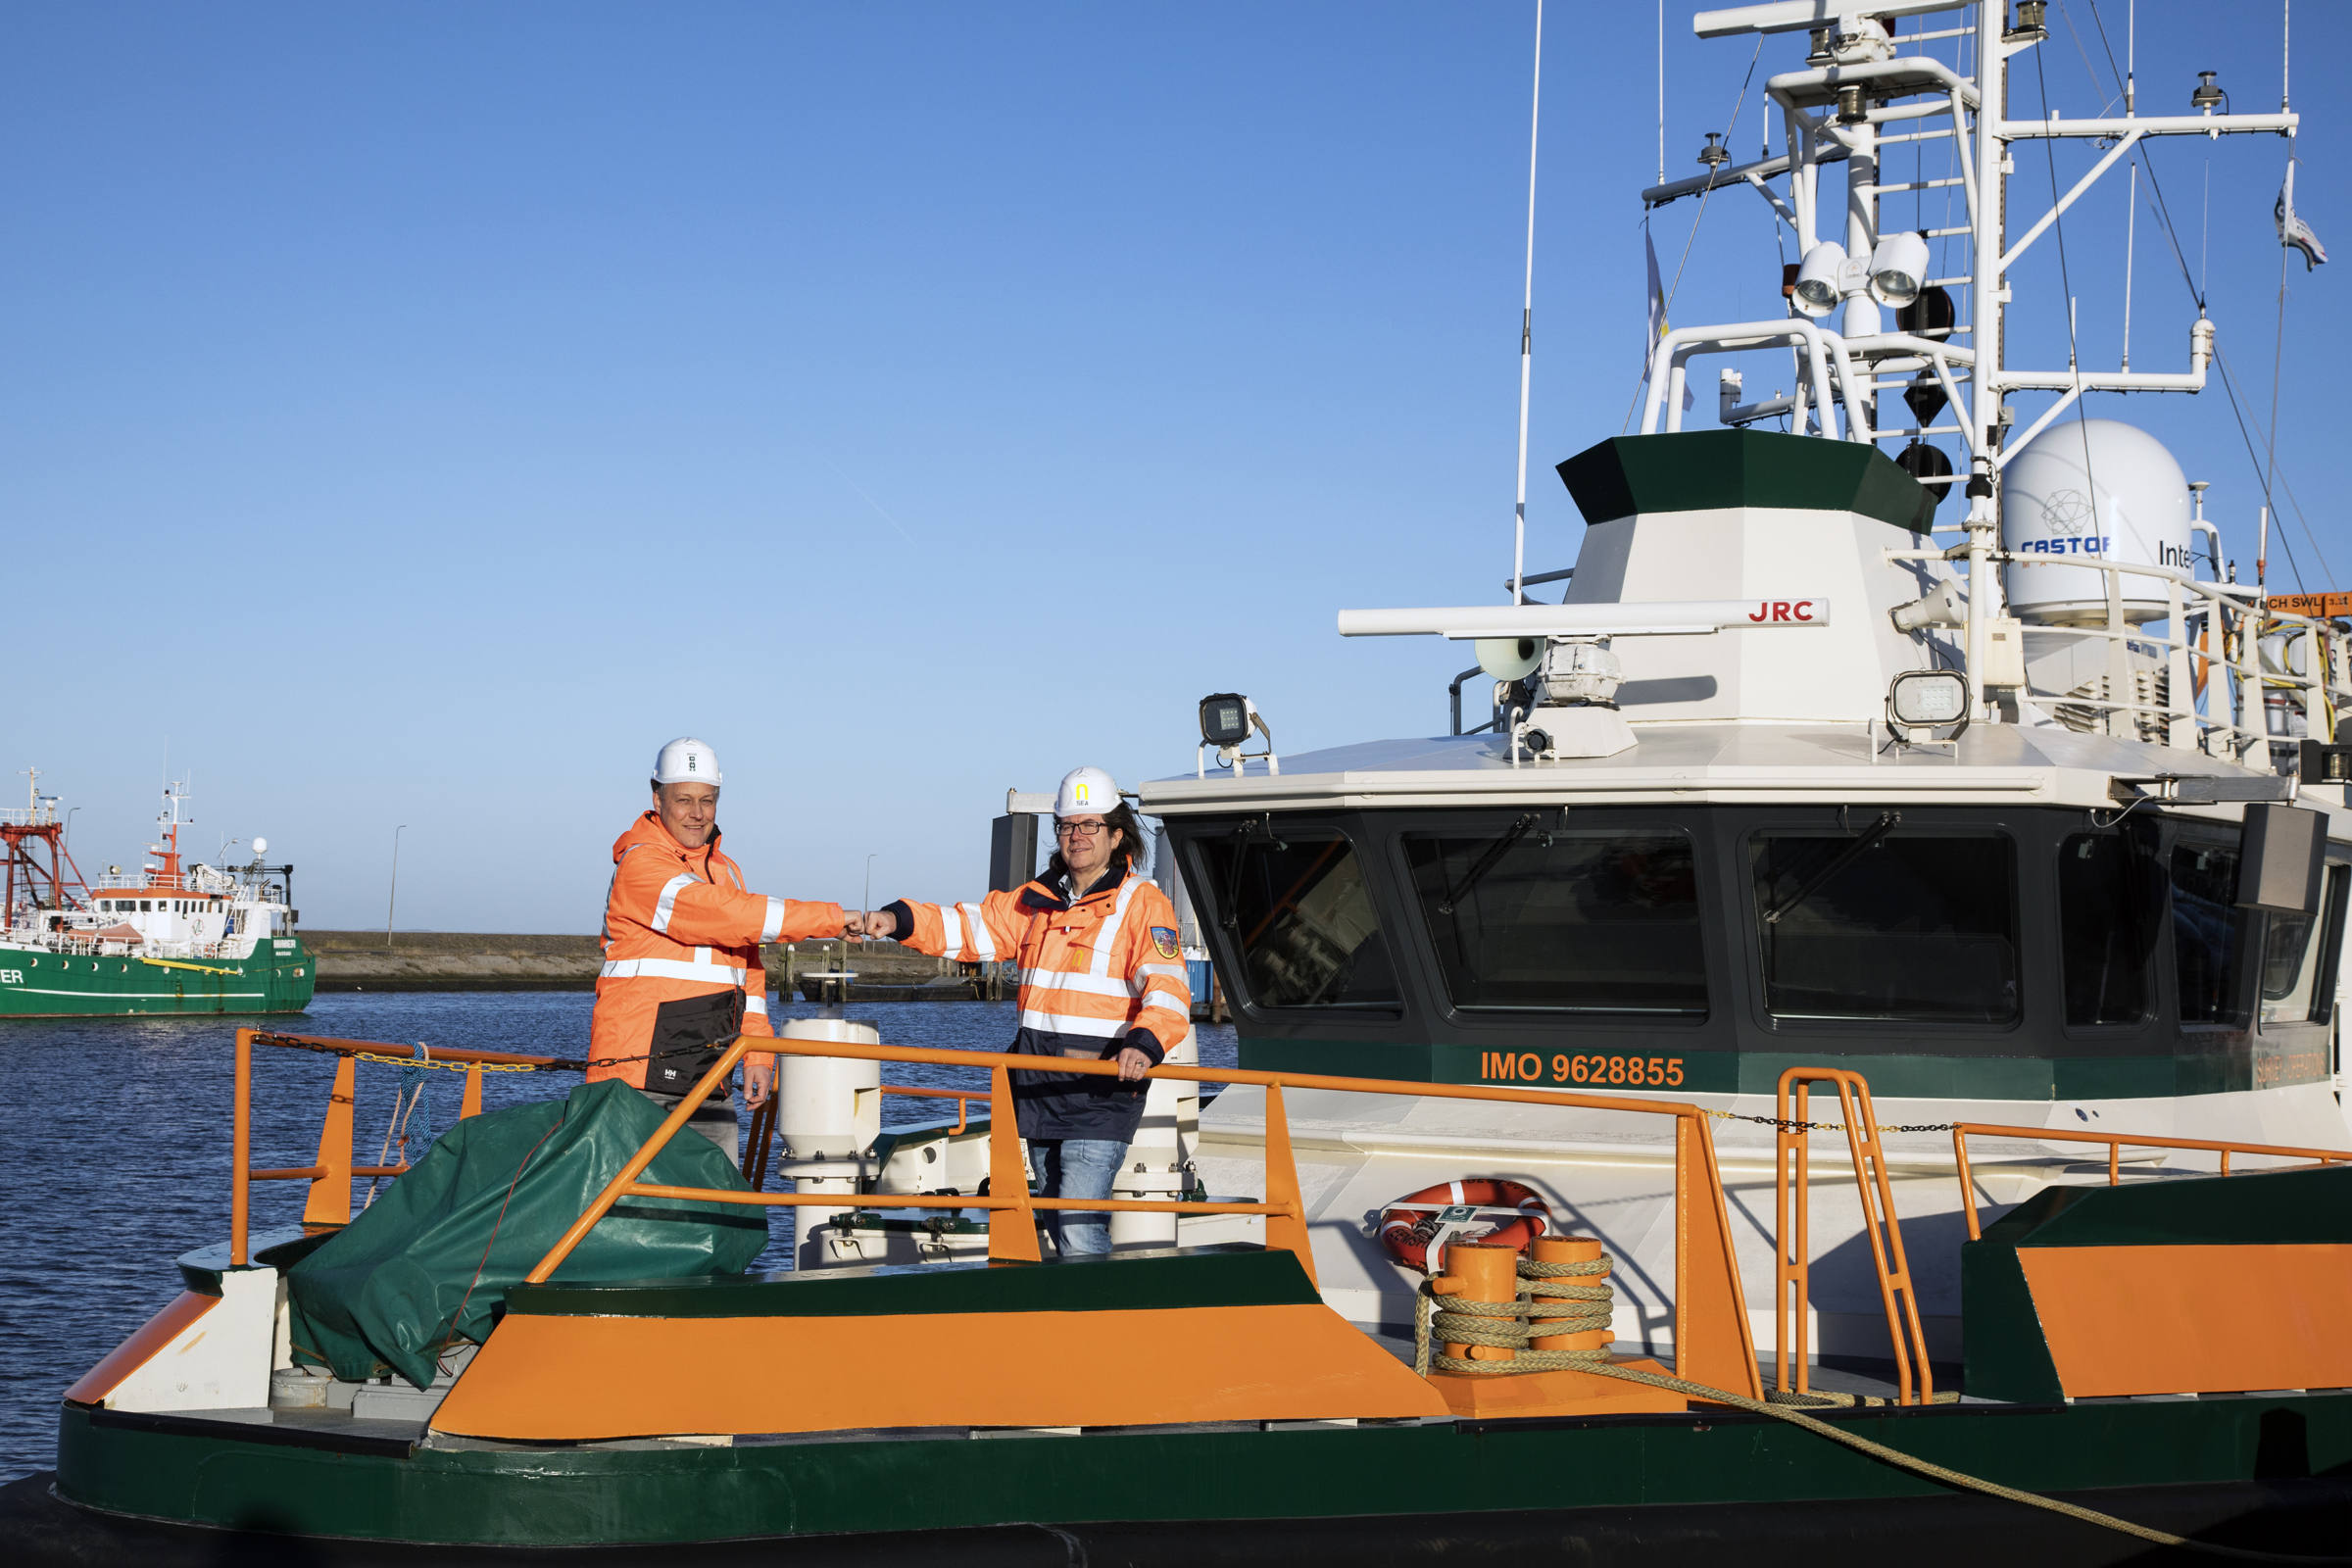 N-Sea concludes long-term vessel agreement for the DP1 35M Hybrid Survey/ROV Support Vessel Geo Focus